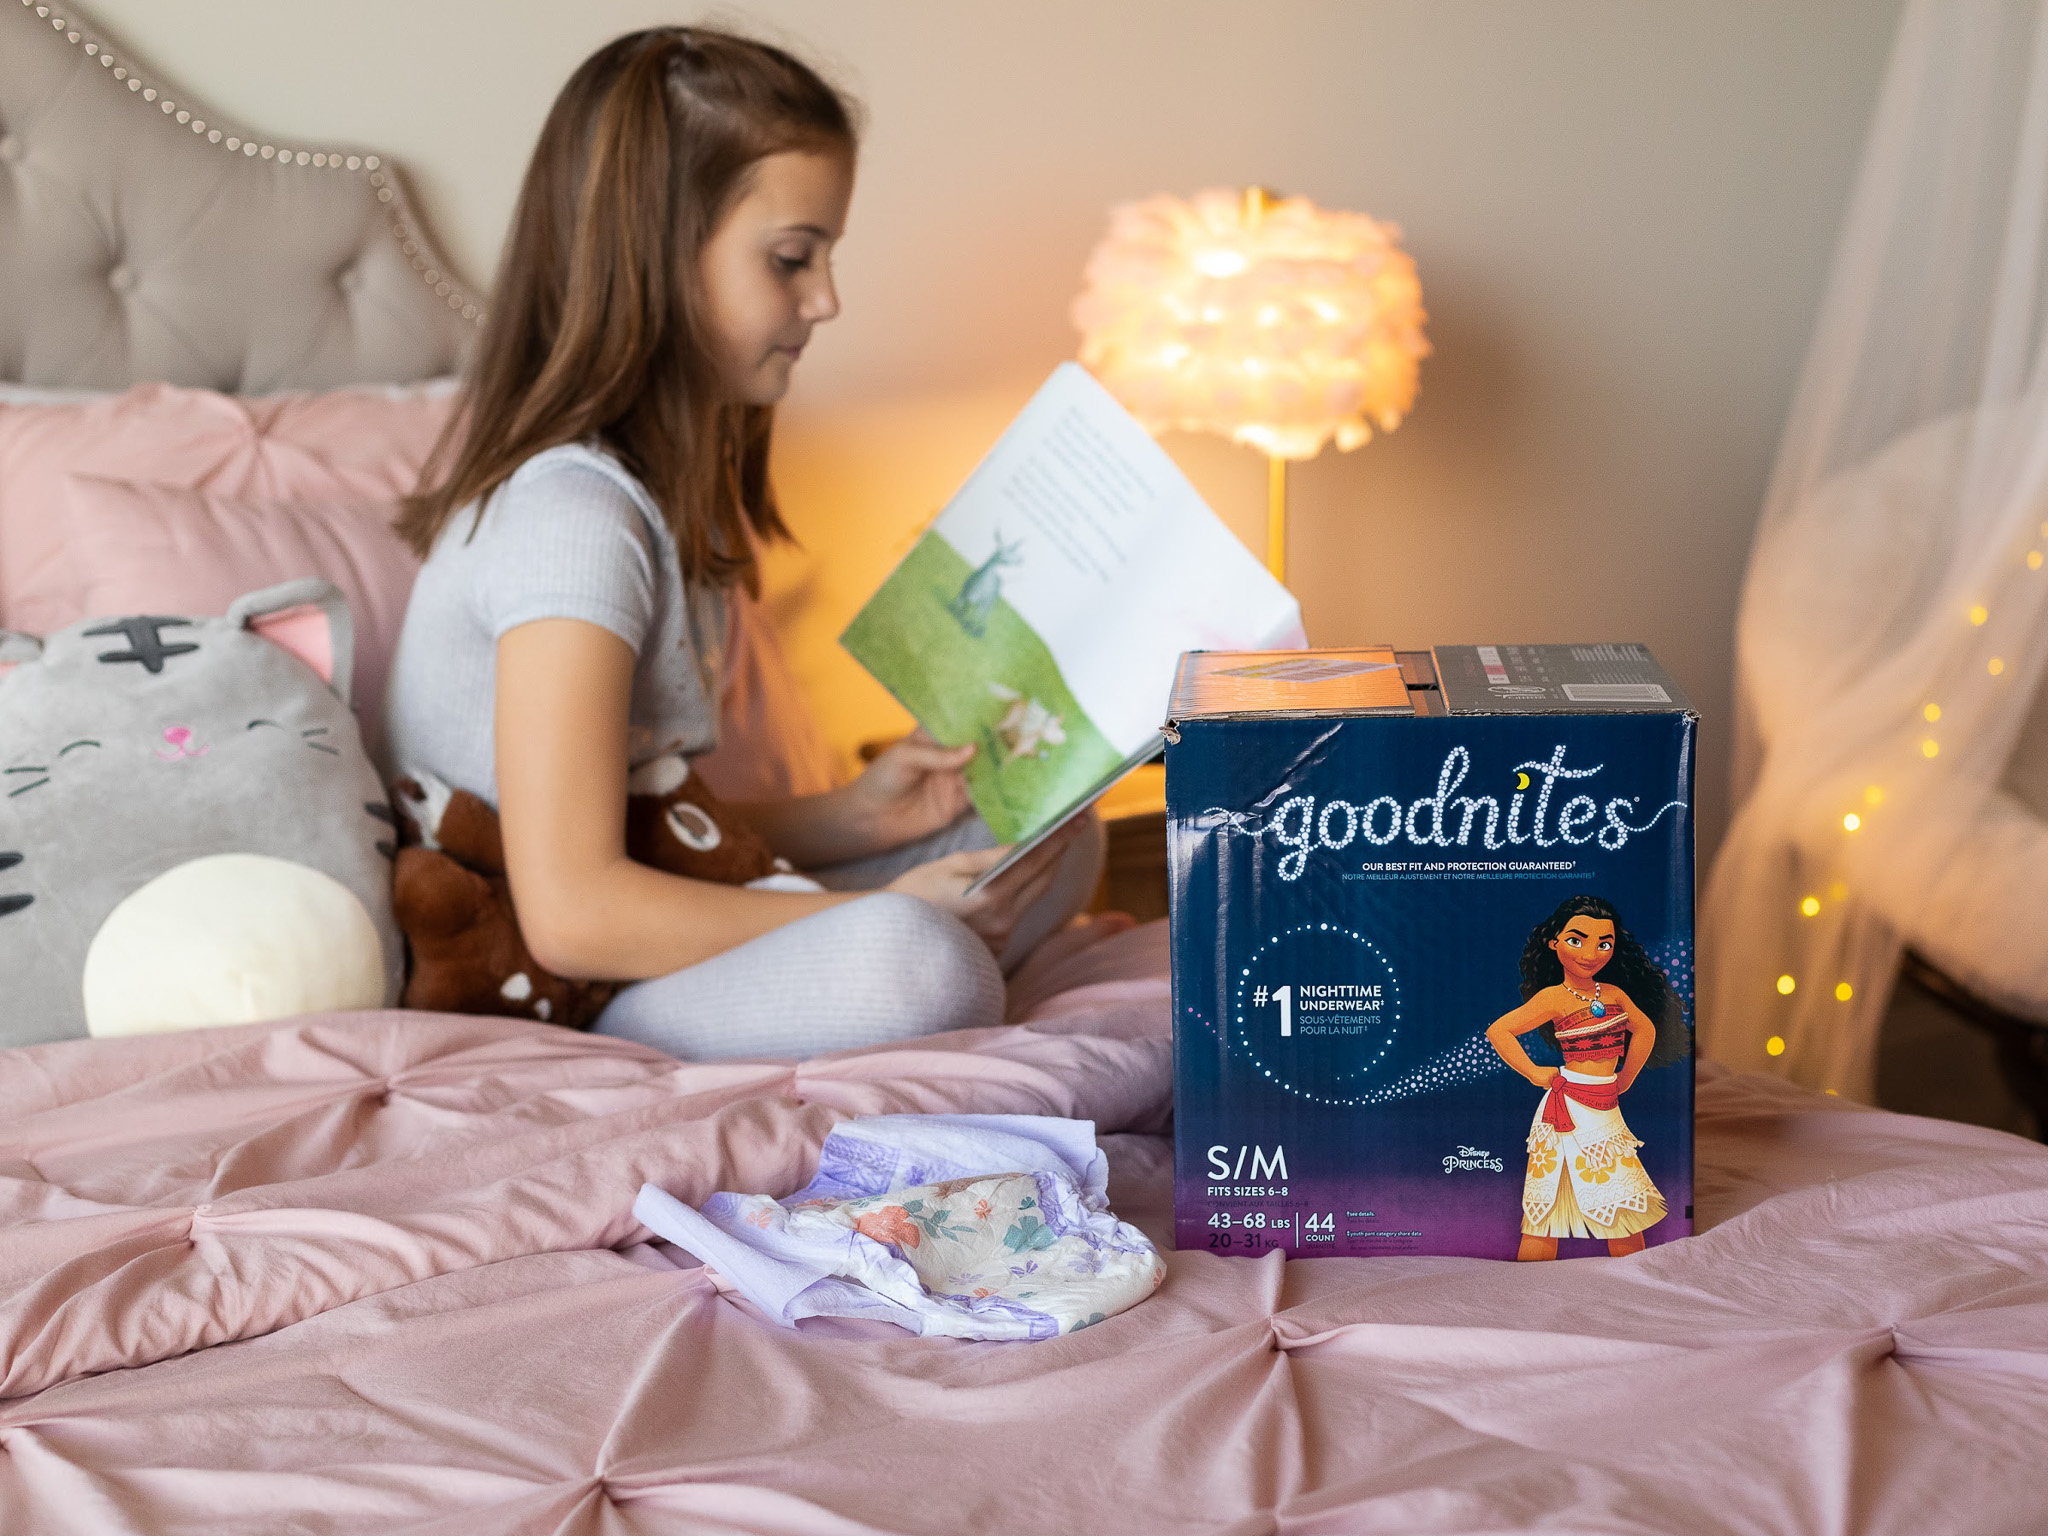 Big Savings On Goodnites® Nighttime Underwear At Publix – Save $5 With The  Digital Coupon - iHeartPublix